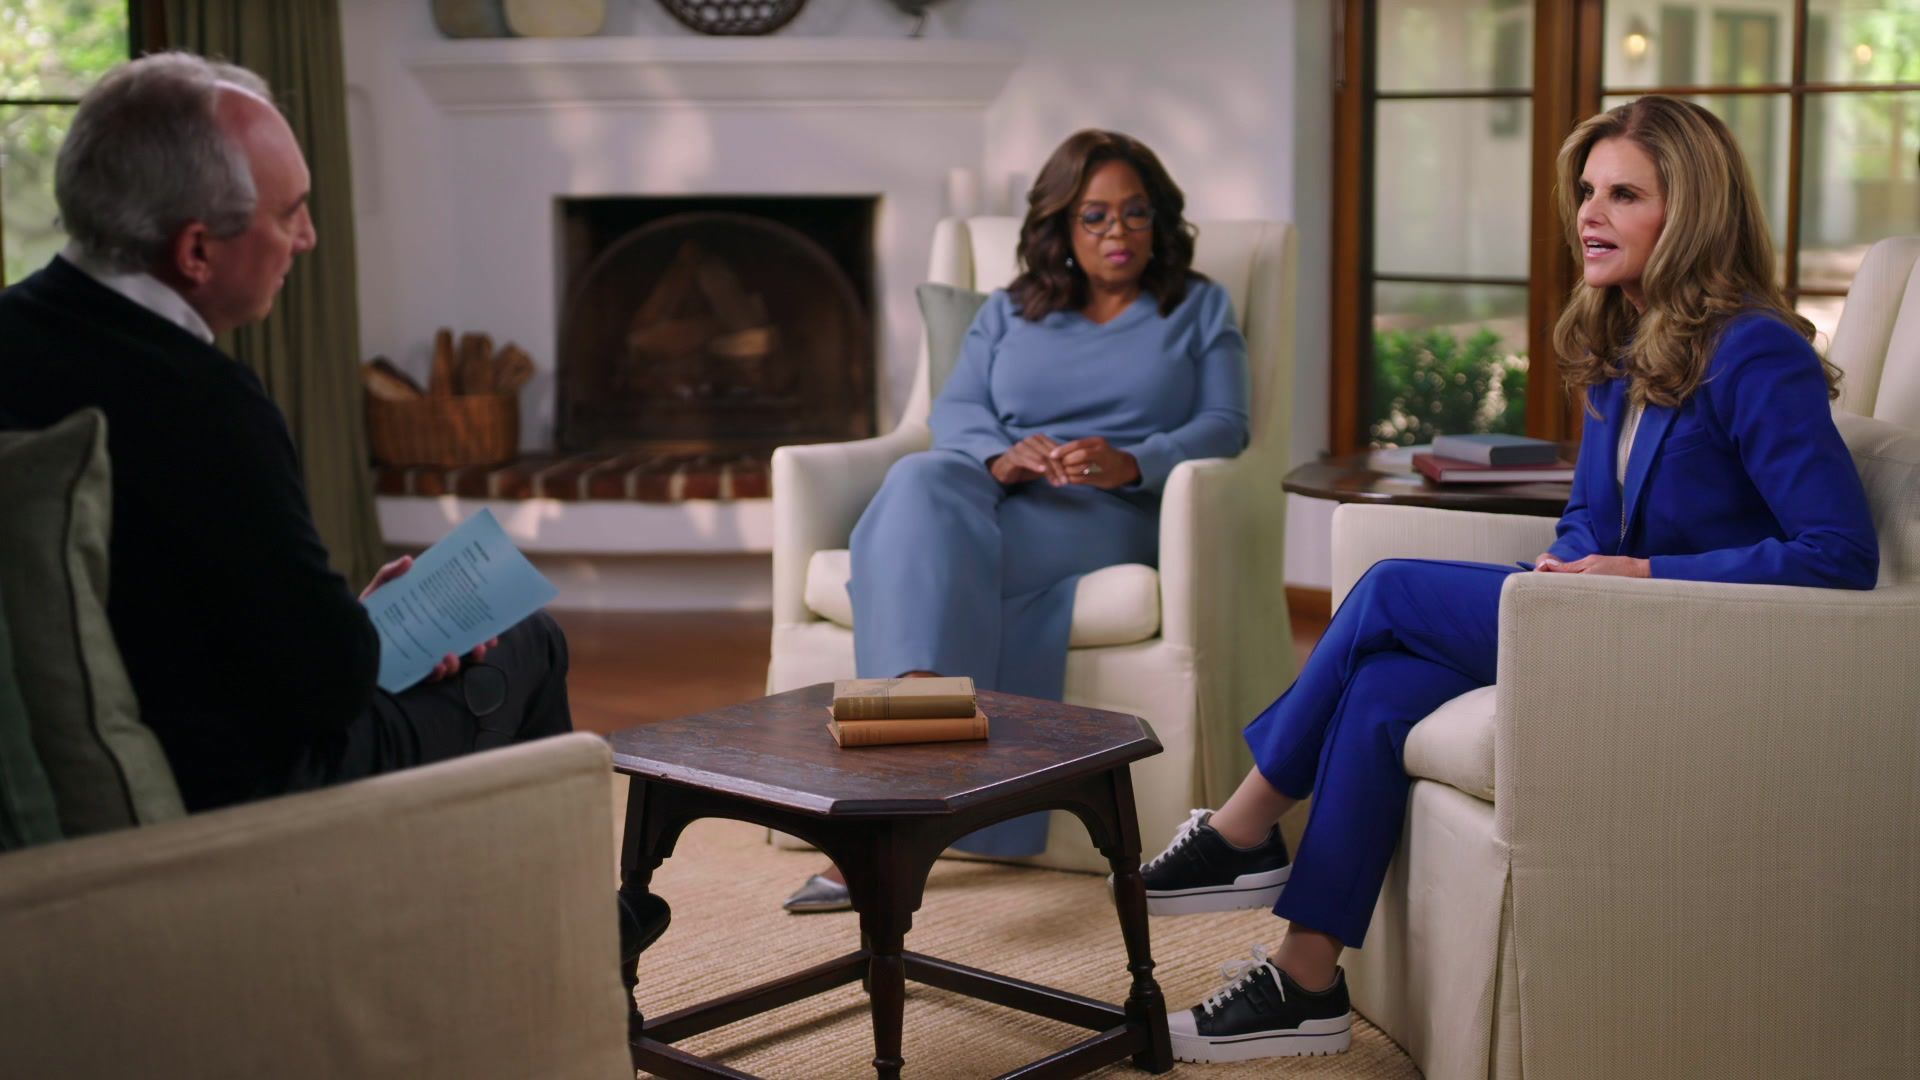 Get a Sneak Peek of Maria and Oprah's Candid Conversation About Menopause and Midlife